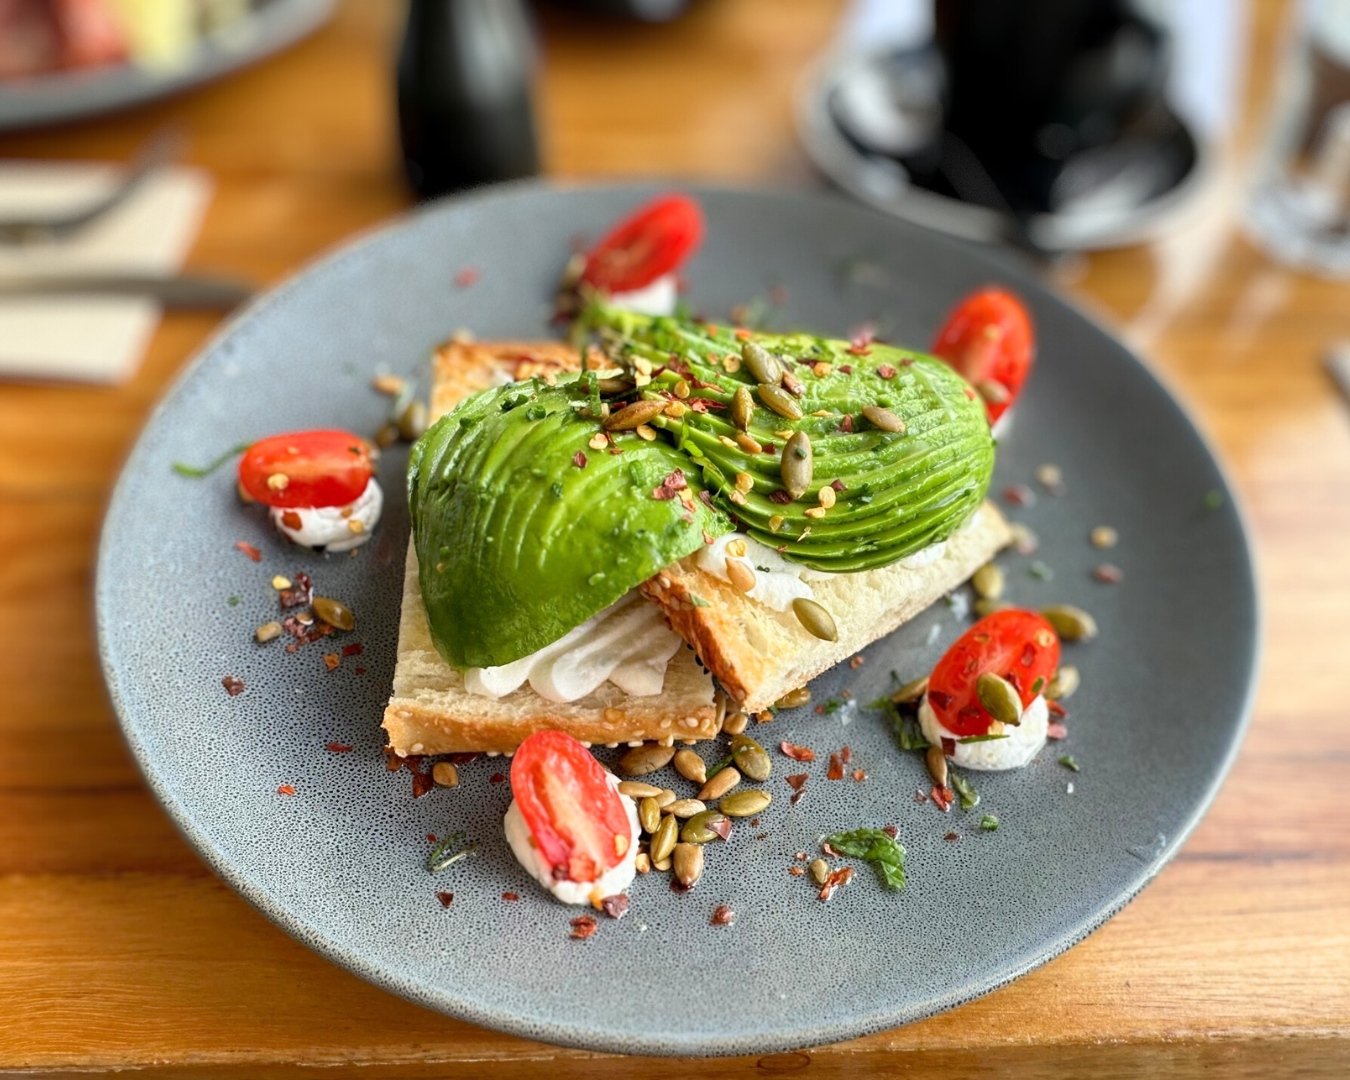 Need a great brunch spot? we open early and serve breakfast until 11.30am, come in and try the new menu full of classics and great new items. 

#ballinansw #wharfbarballina #ballinabrunch #balliinabreakfast